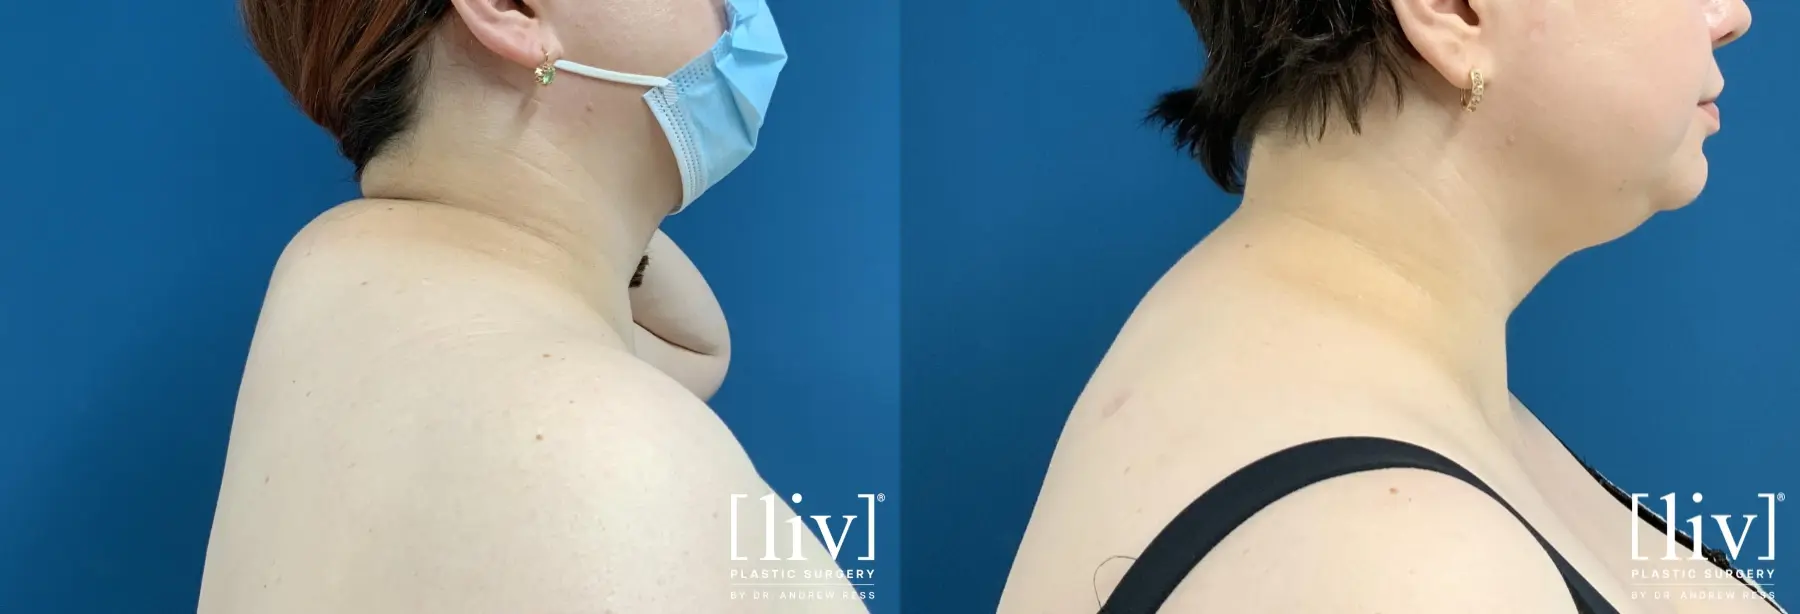 Posterior Neck Liposuction - Before and After  